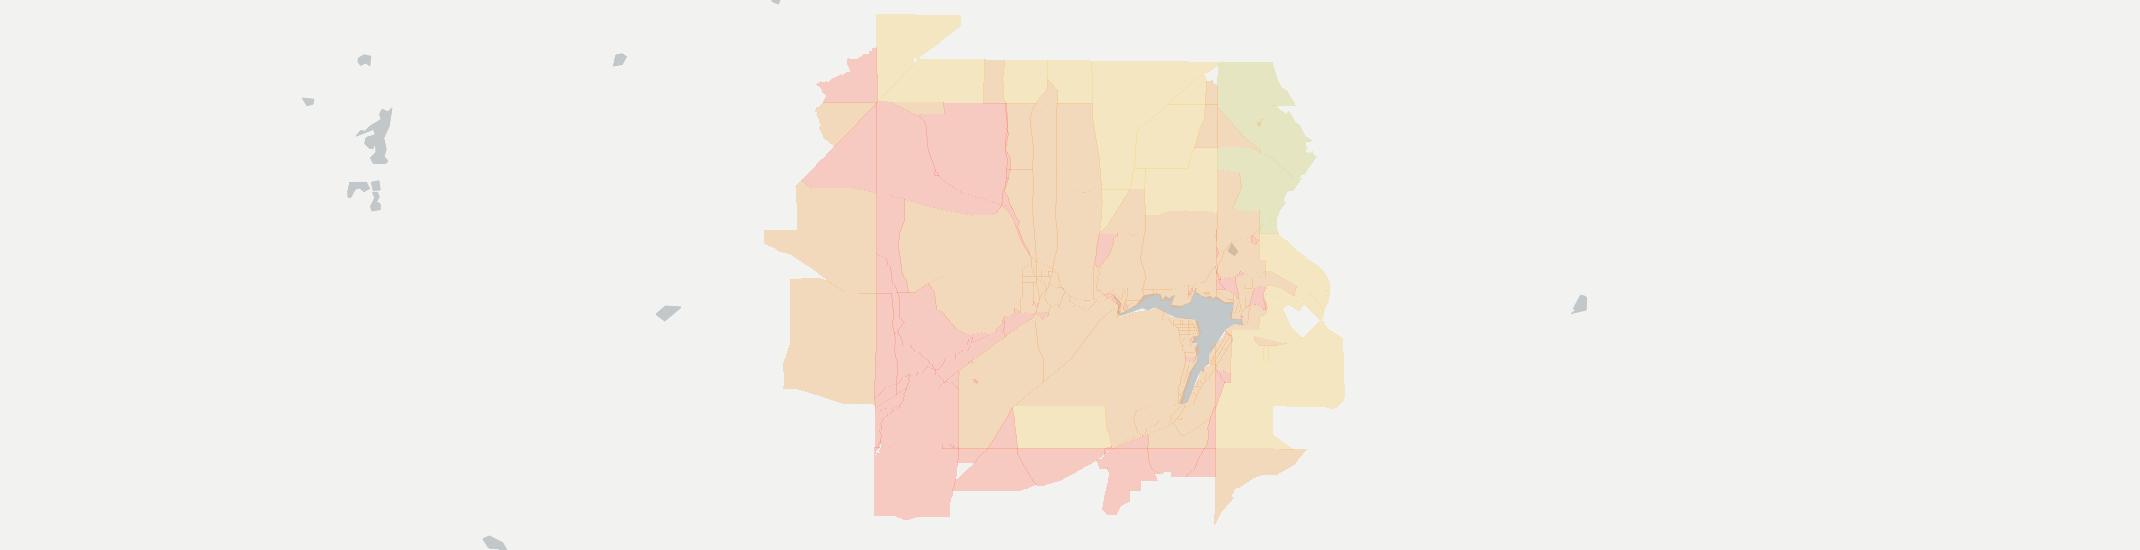 Rushford Internet Competition Map. Click for interactive map